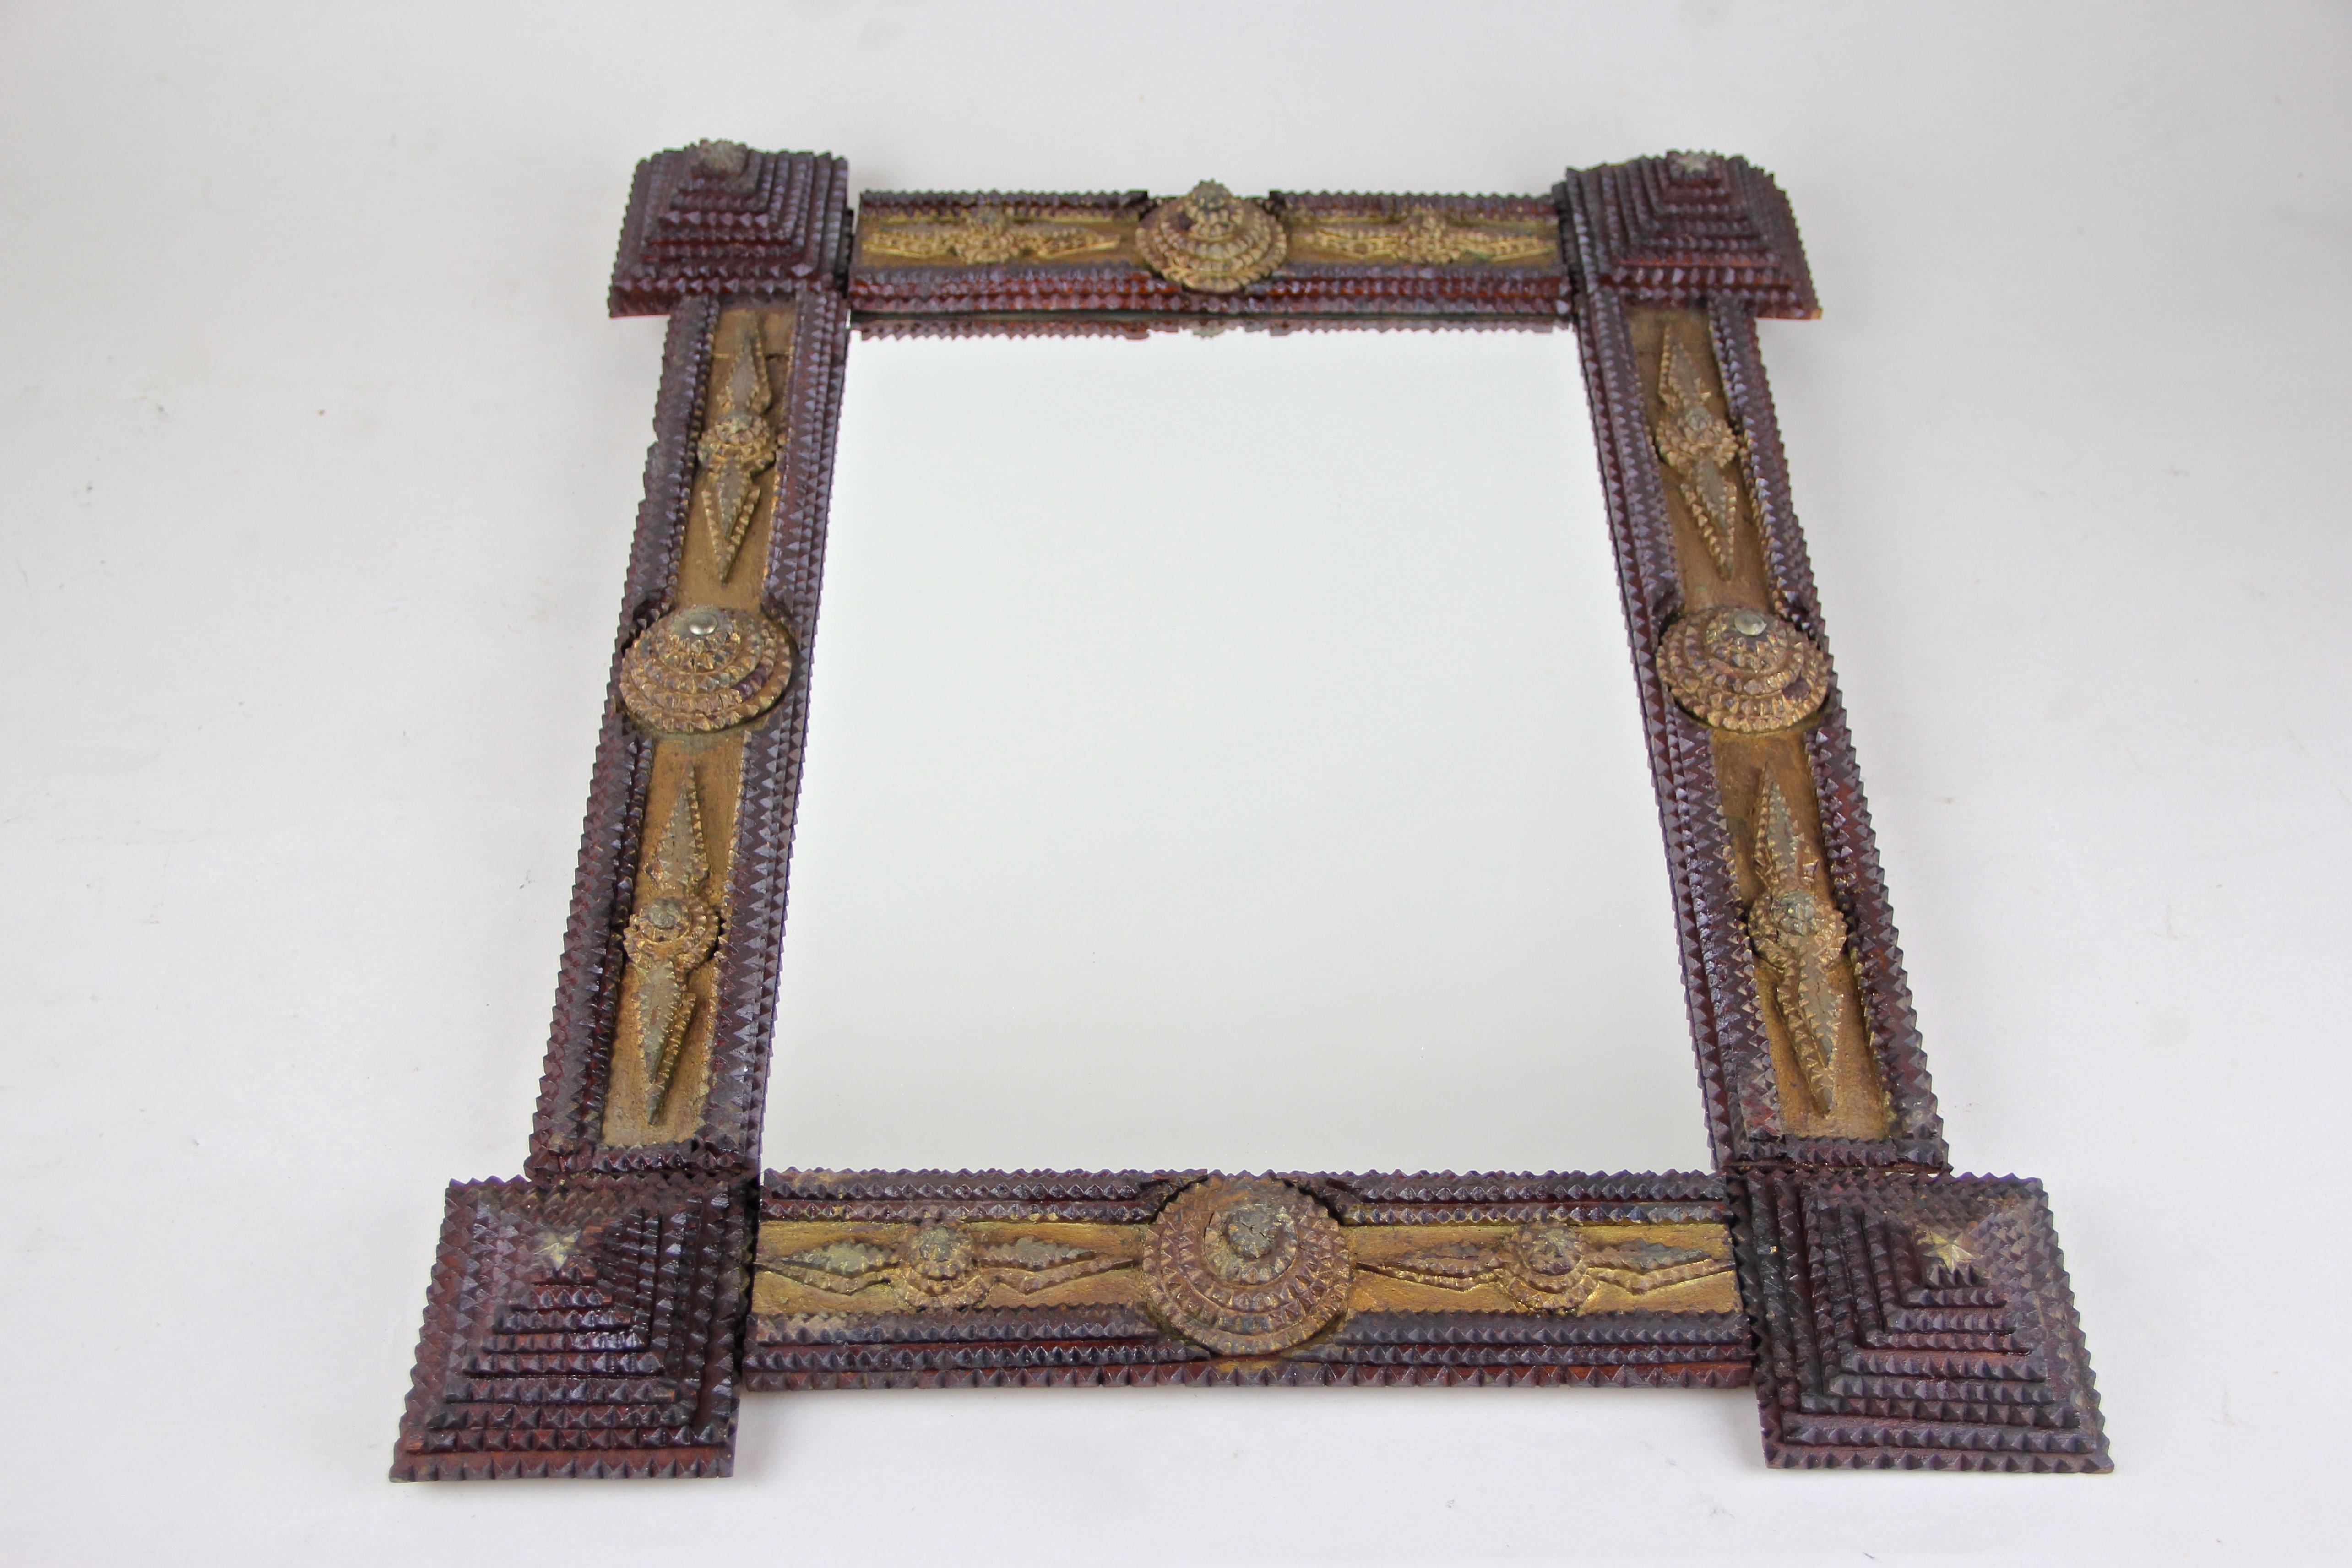 Remarkable tramp art mirror from Austria coming from the 19th century. Built from fine hand carved basswood this fantastic work from circa 1860 was done in the so called 